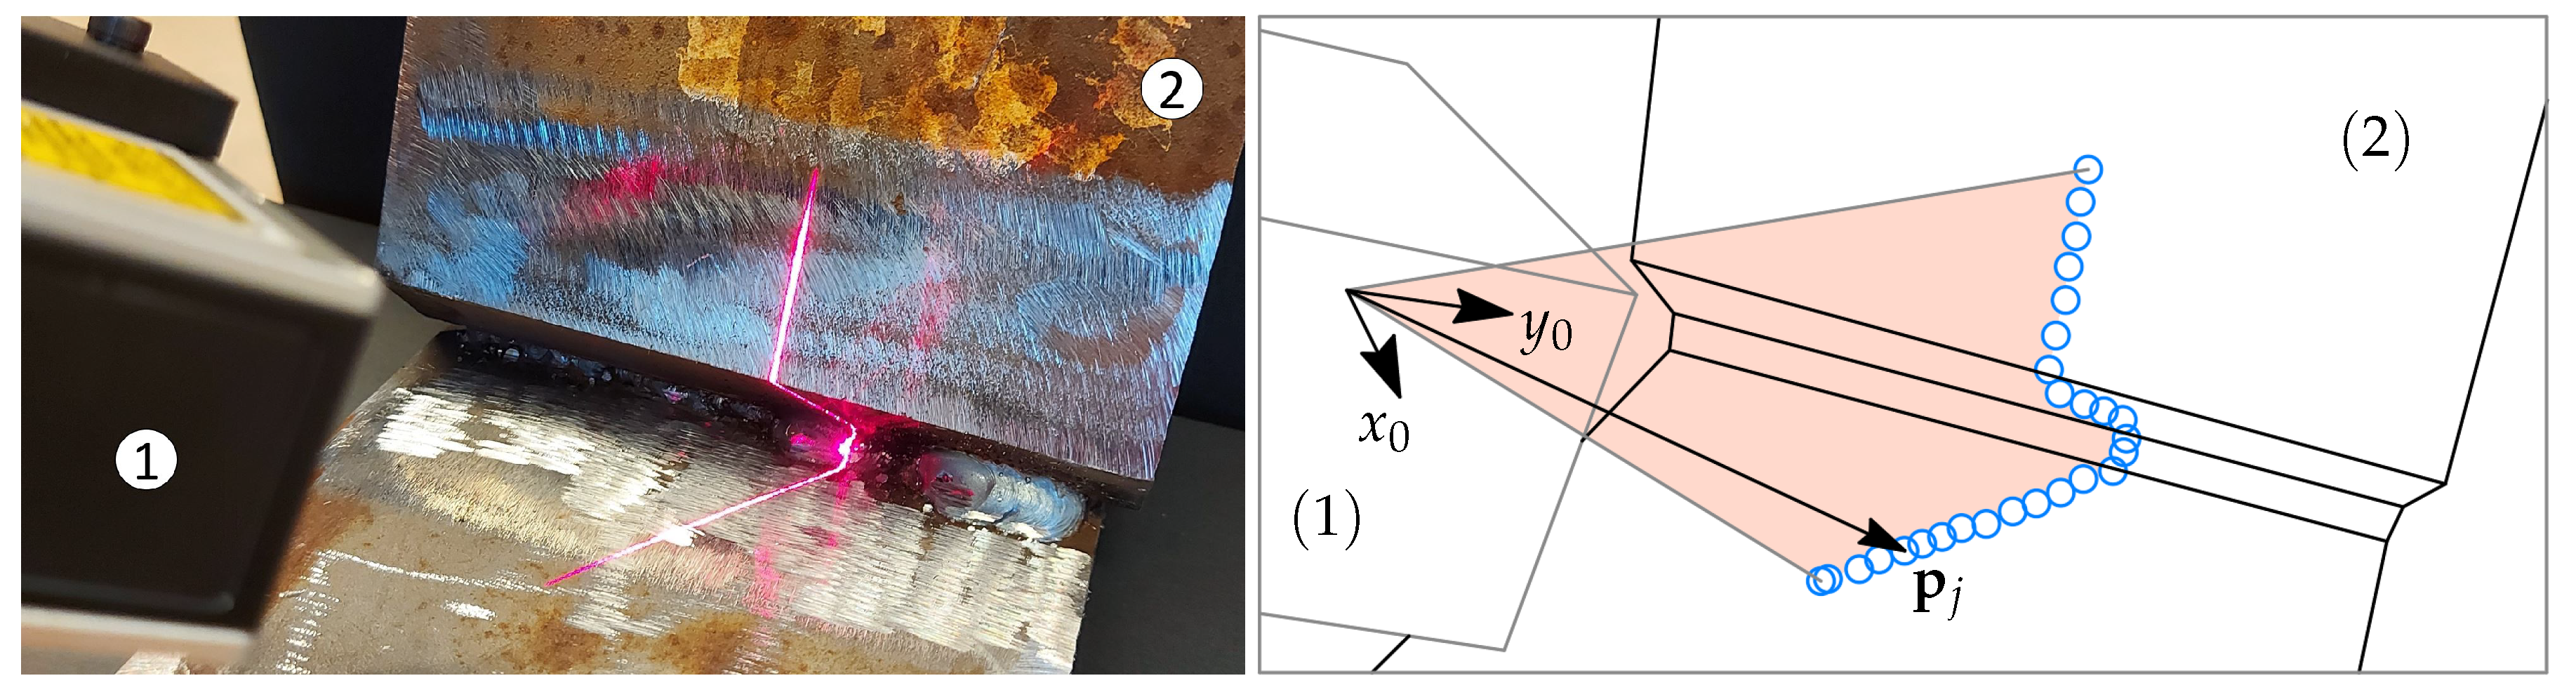 Sensors | Free Full-Text | Laser Scanning and Parametrization of Weld  Grooves with Reflective Surfaces